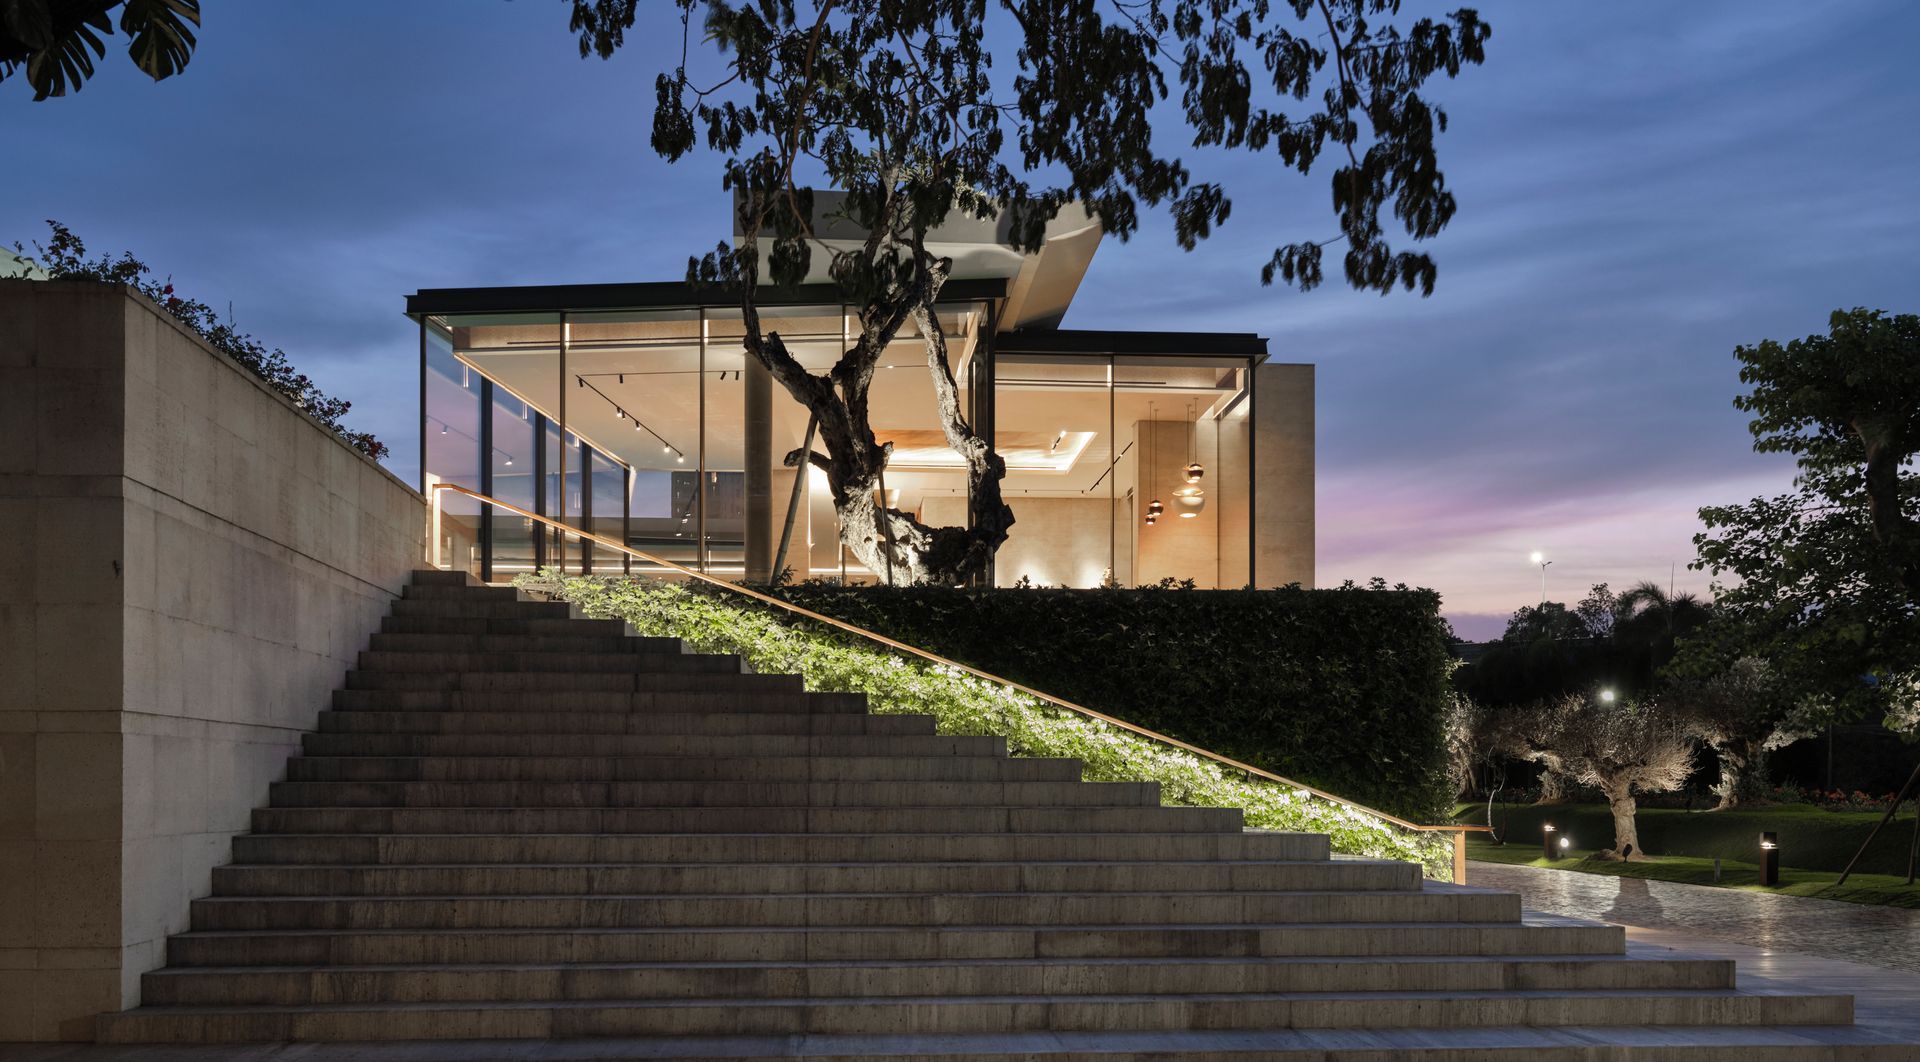 A modern home with OTIIMA large glass windows, viewed from the bottom of a grand staircase adorned with greenery and illuminated handrails. The evening sky adds a serene backdrop, enhancing the contemporary architectural design.